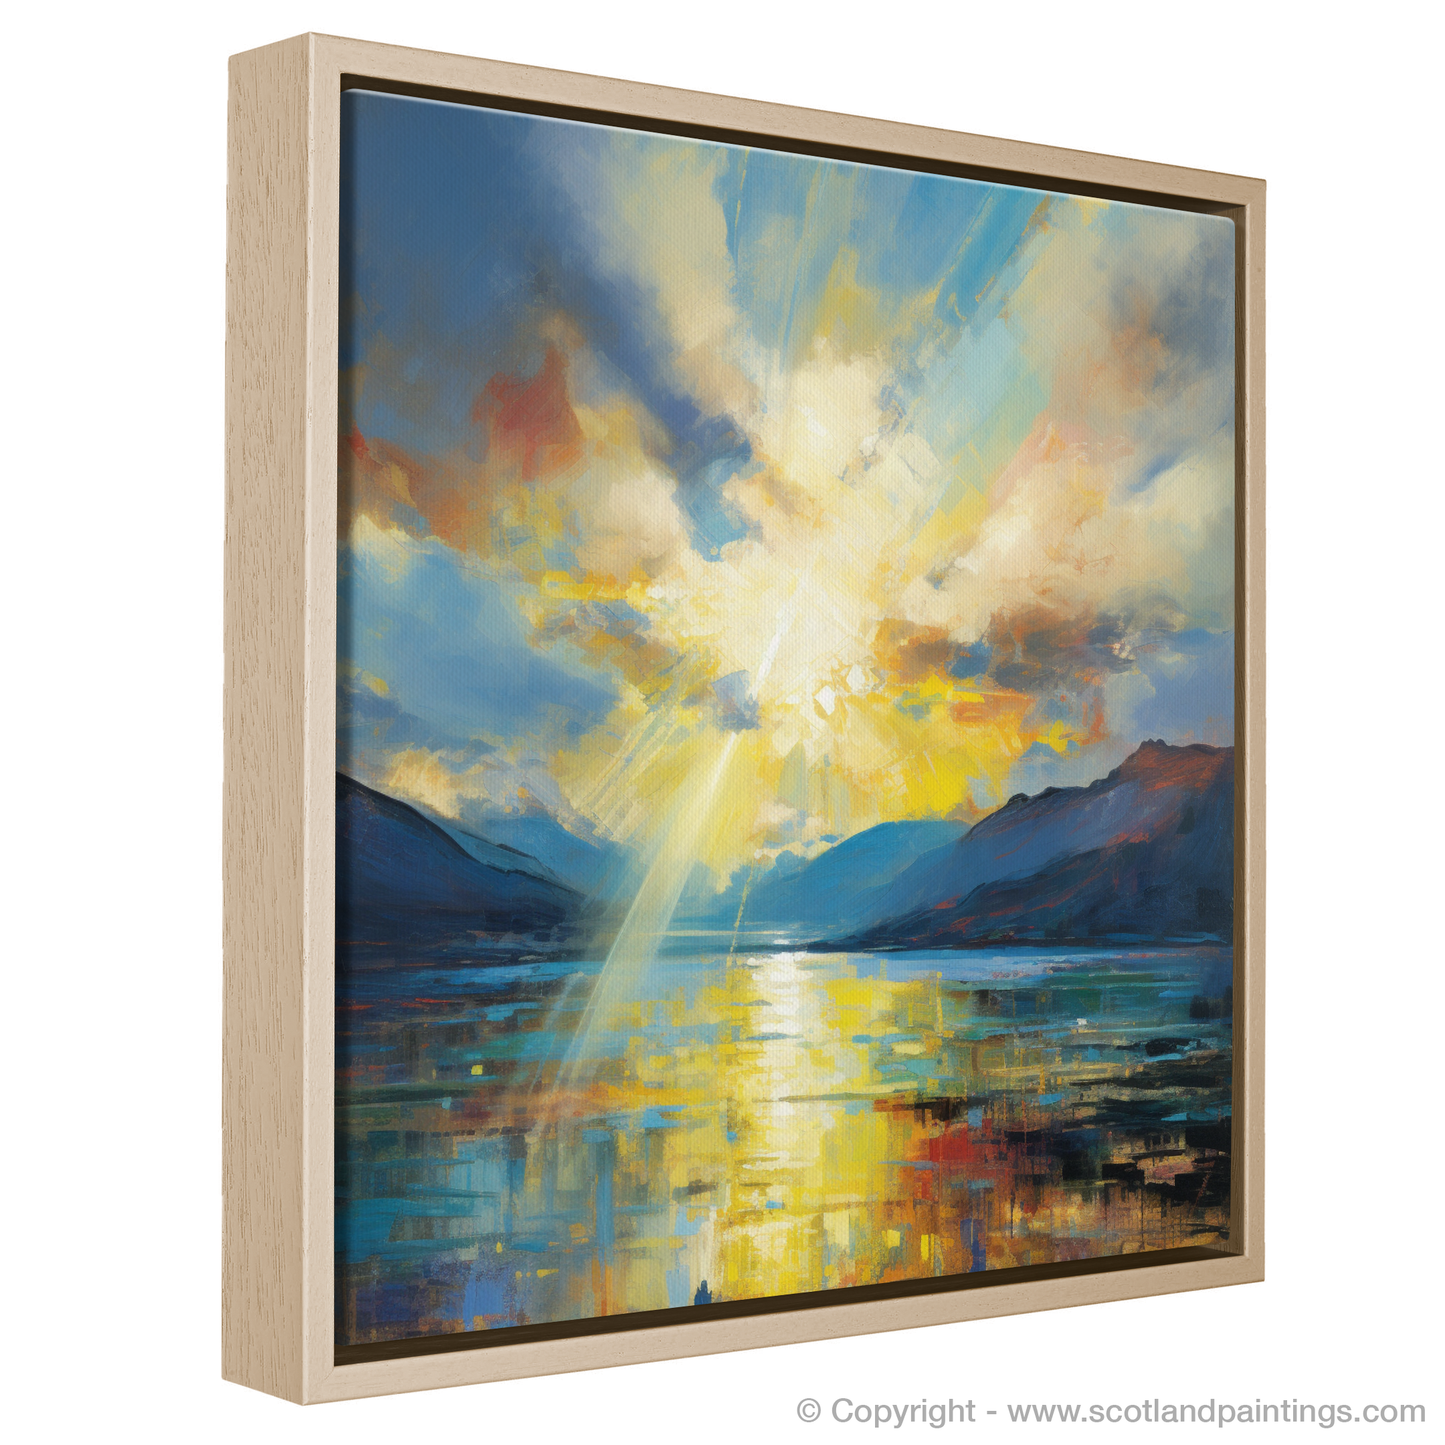 Painting and Art Print of Sun rays through clouds above Loch Lomond entitled "Radiance over Loch Lomond: An Abstract Expressionist Ode to Nature's Beauty".